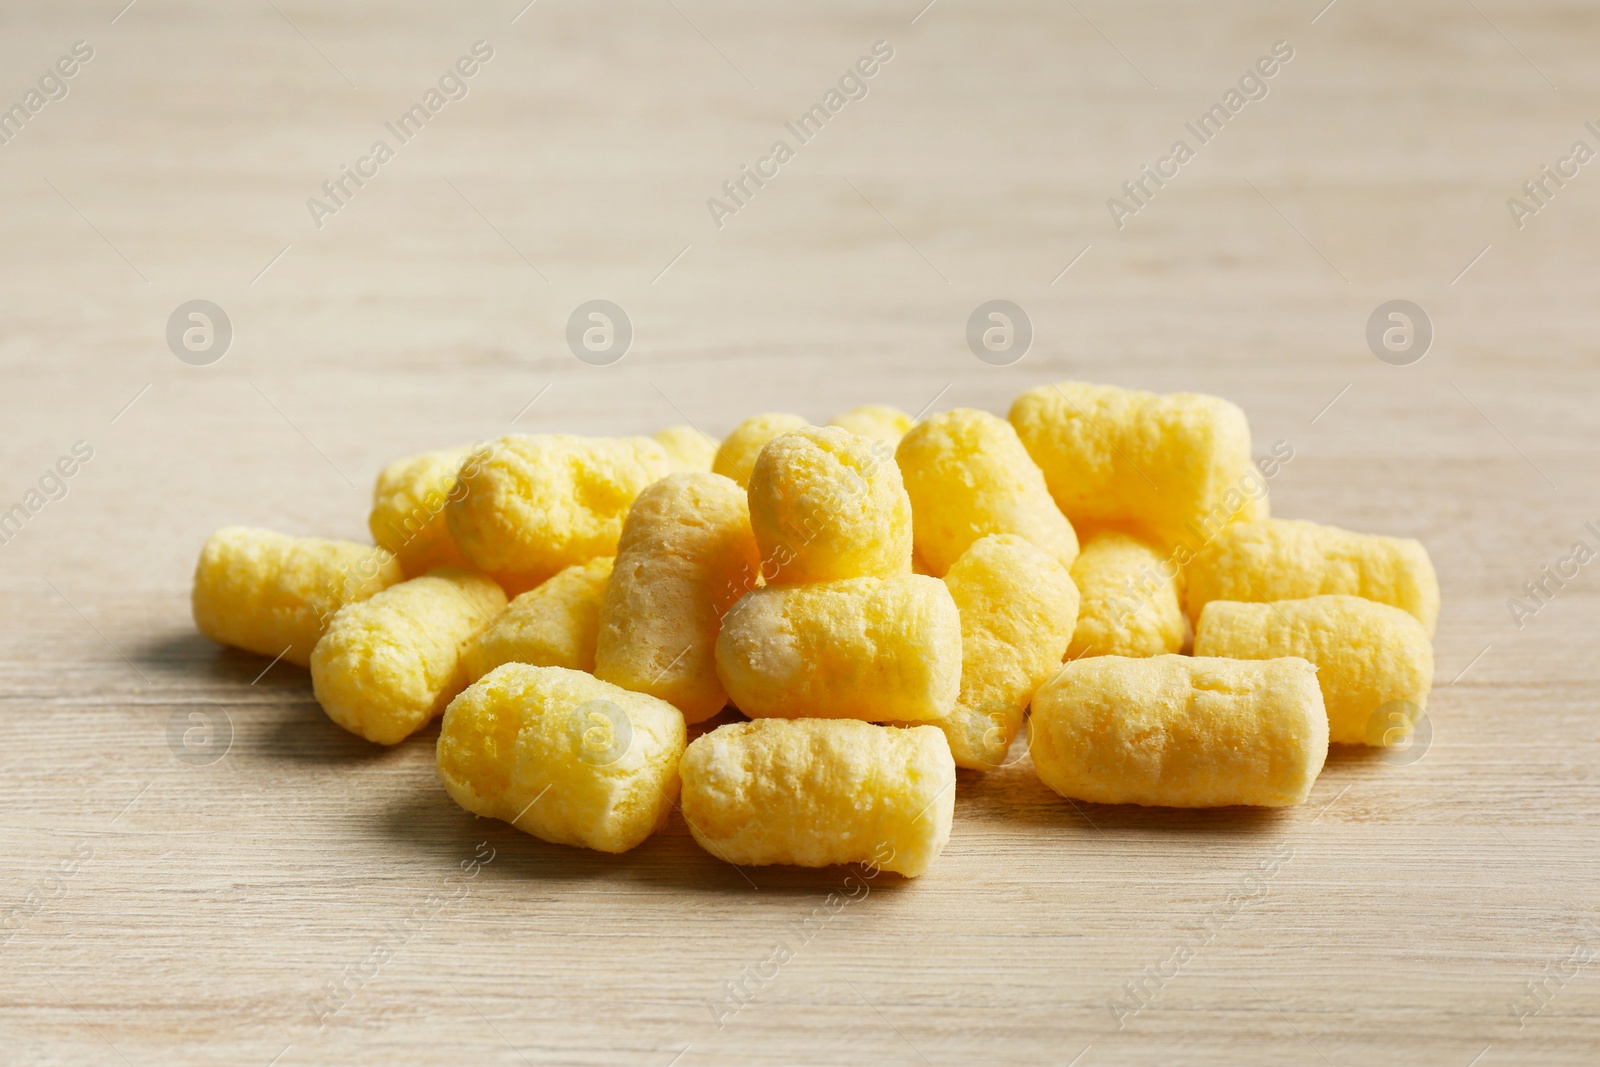 Photo of Pile of corn sticks on wooden table